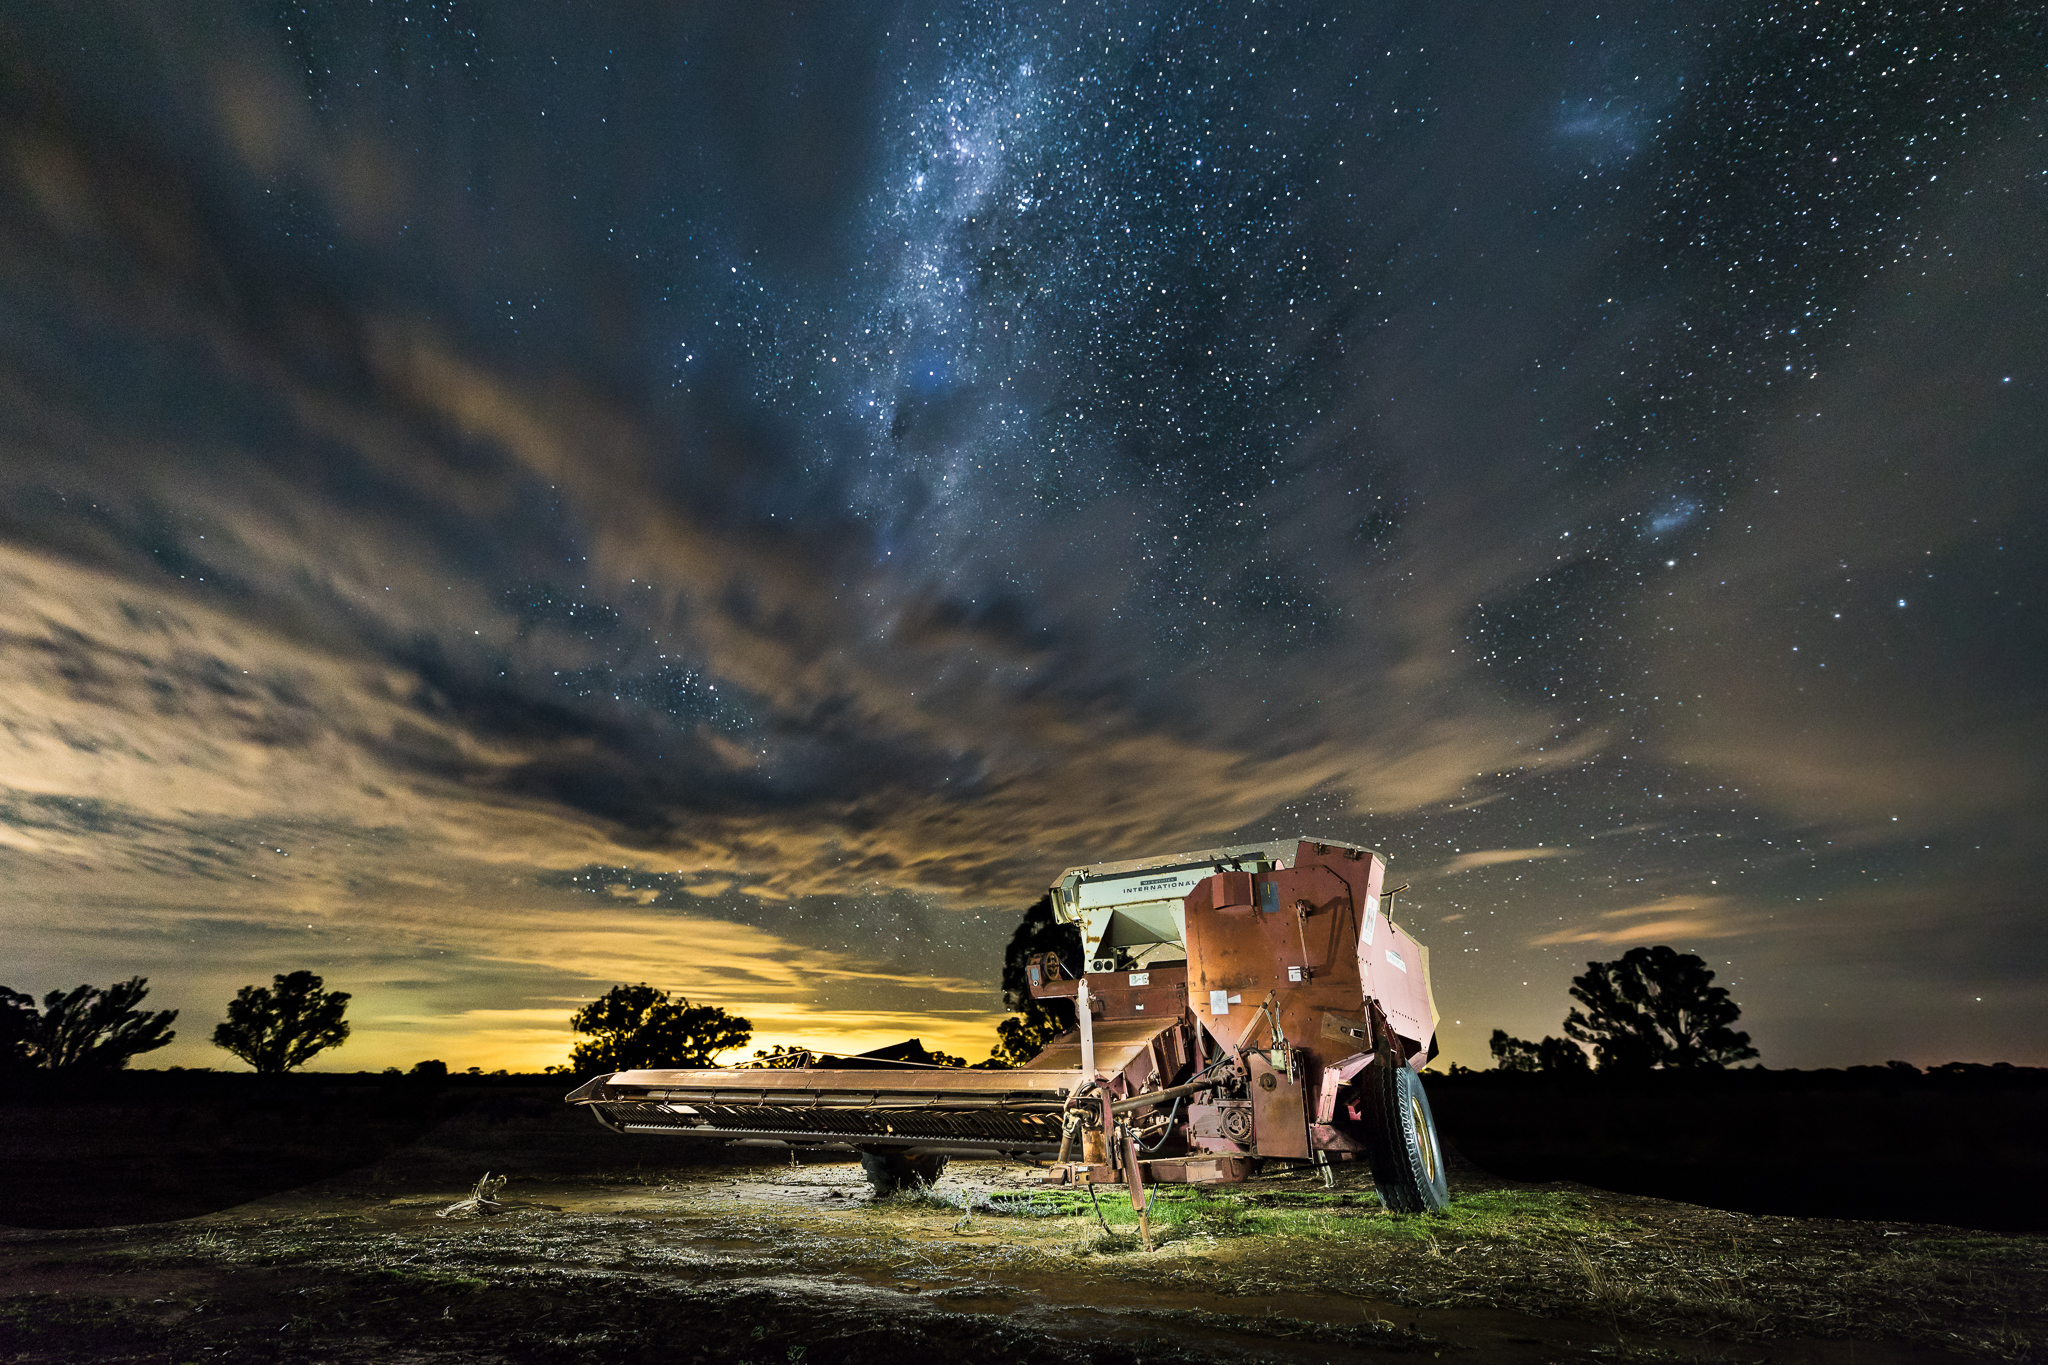 Figure 9 - A light painted Harvester with a night sky background